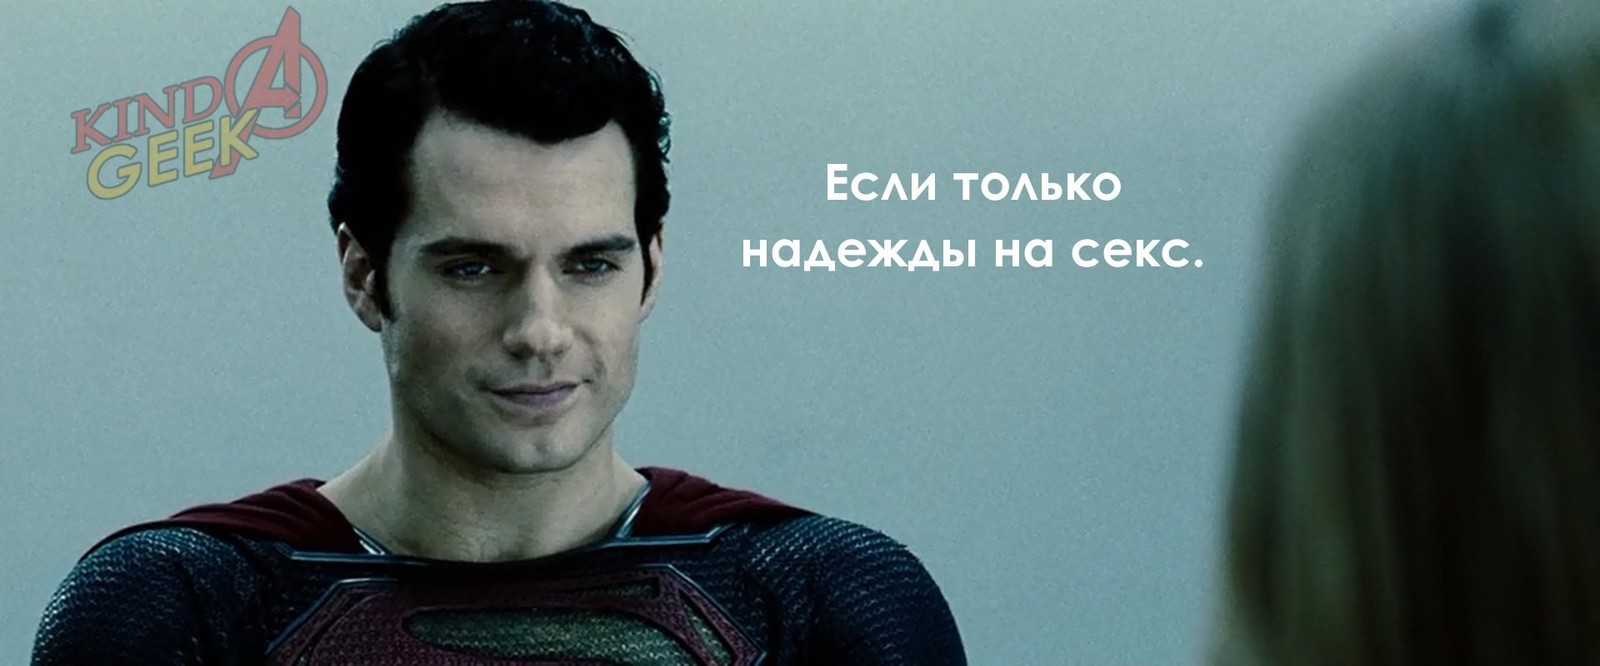 So that's what the S on the chest means. - Superman, Loyce Lane, Sex, Надежда, Kinda geek, Longpost